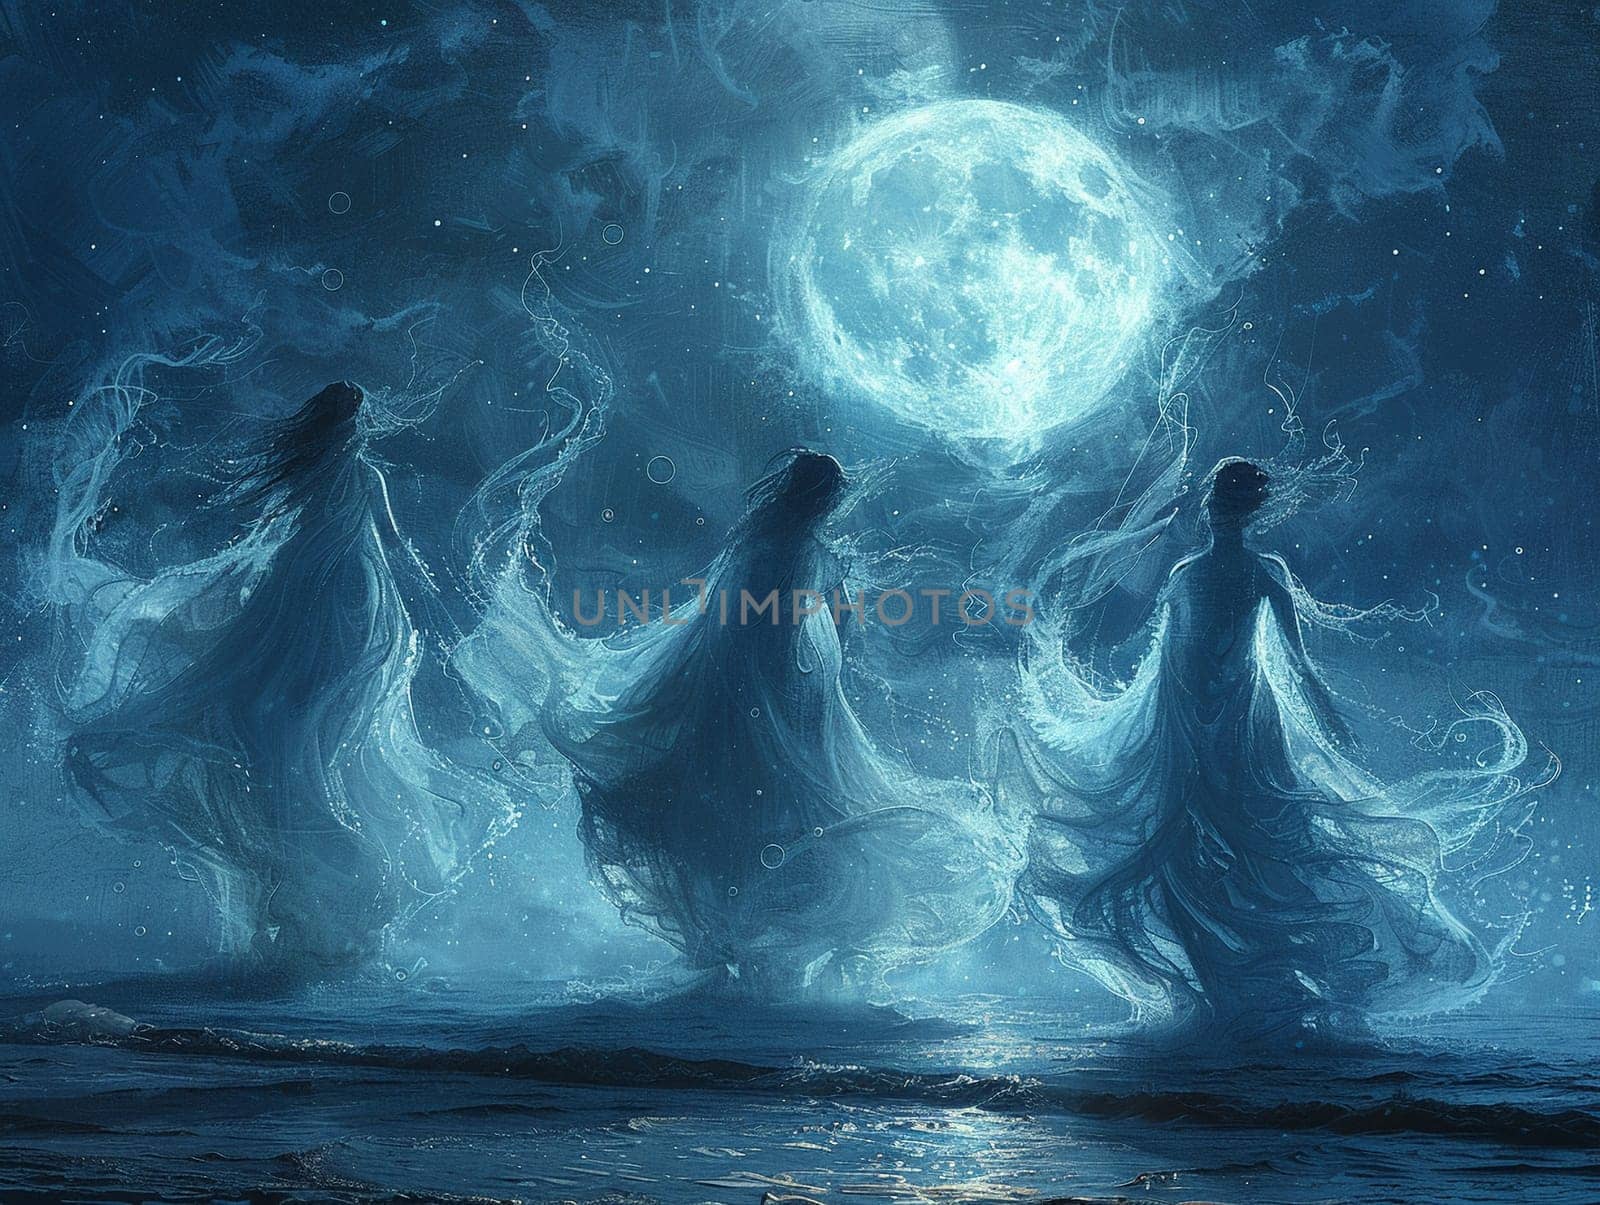 Water sprites dancing in a moonlit pool, digital art with ethereal figures and shimmering effects.